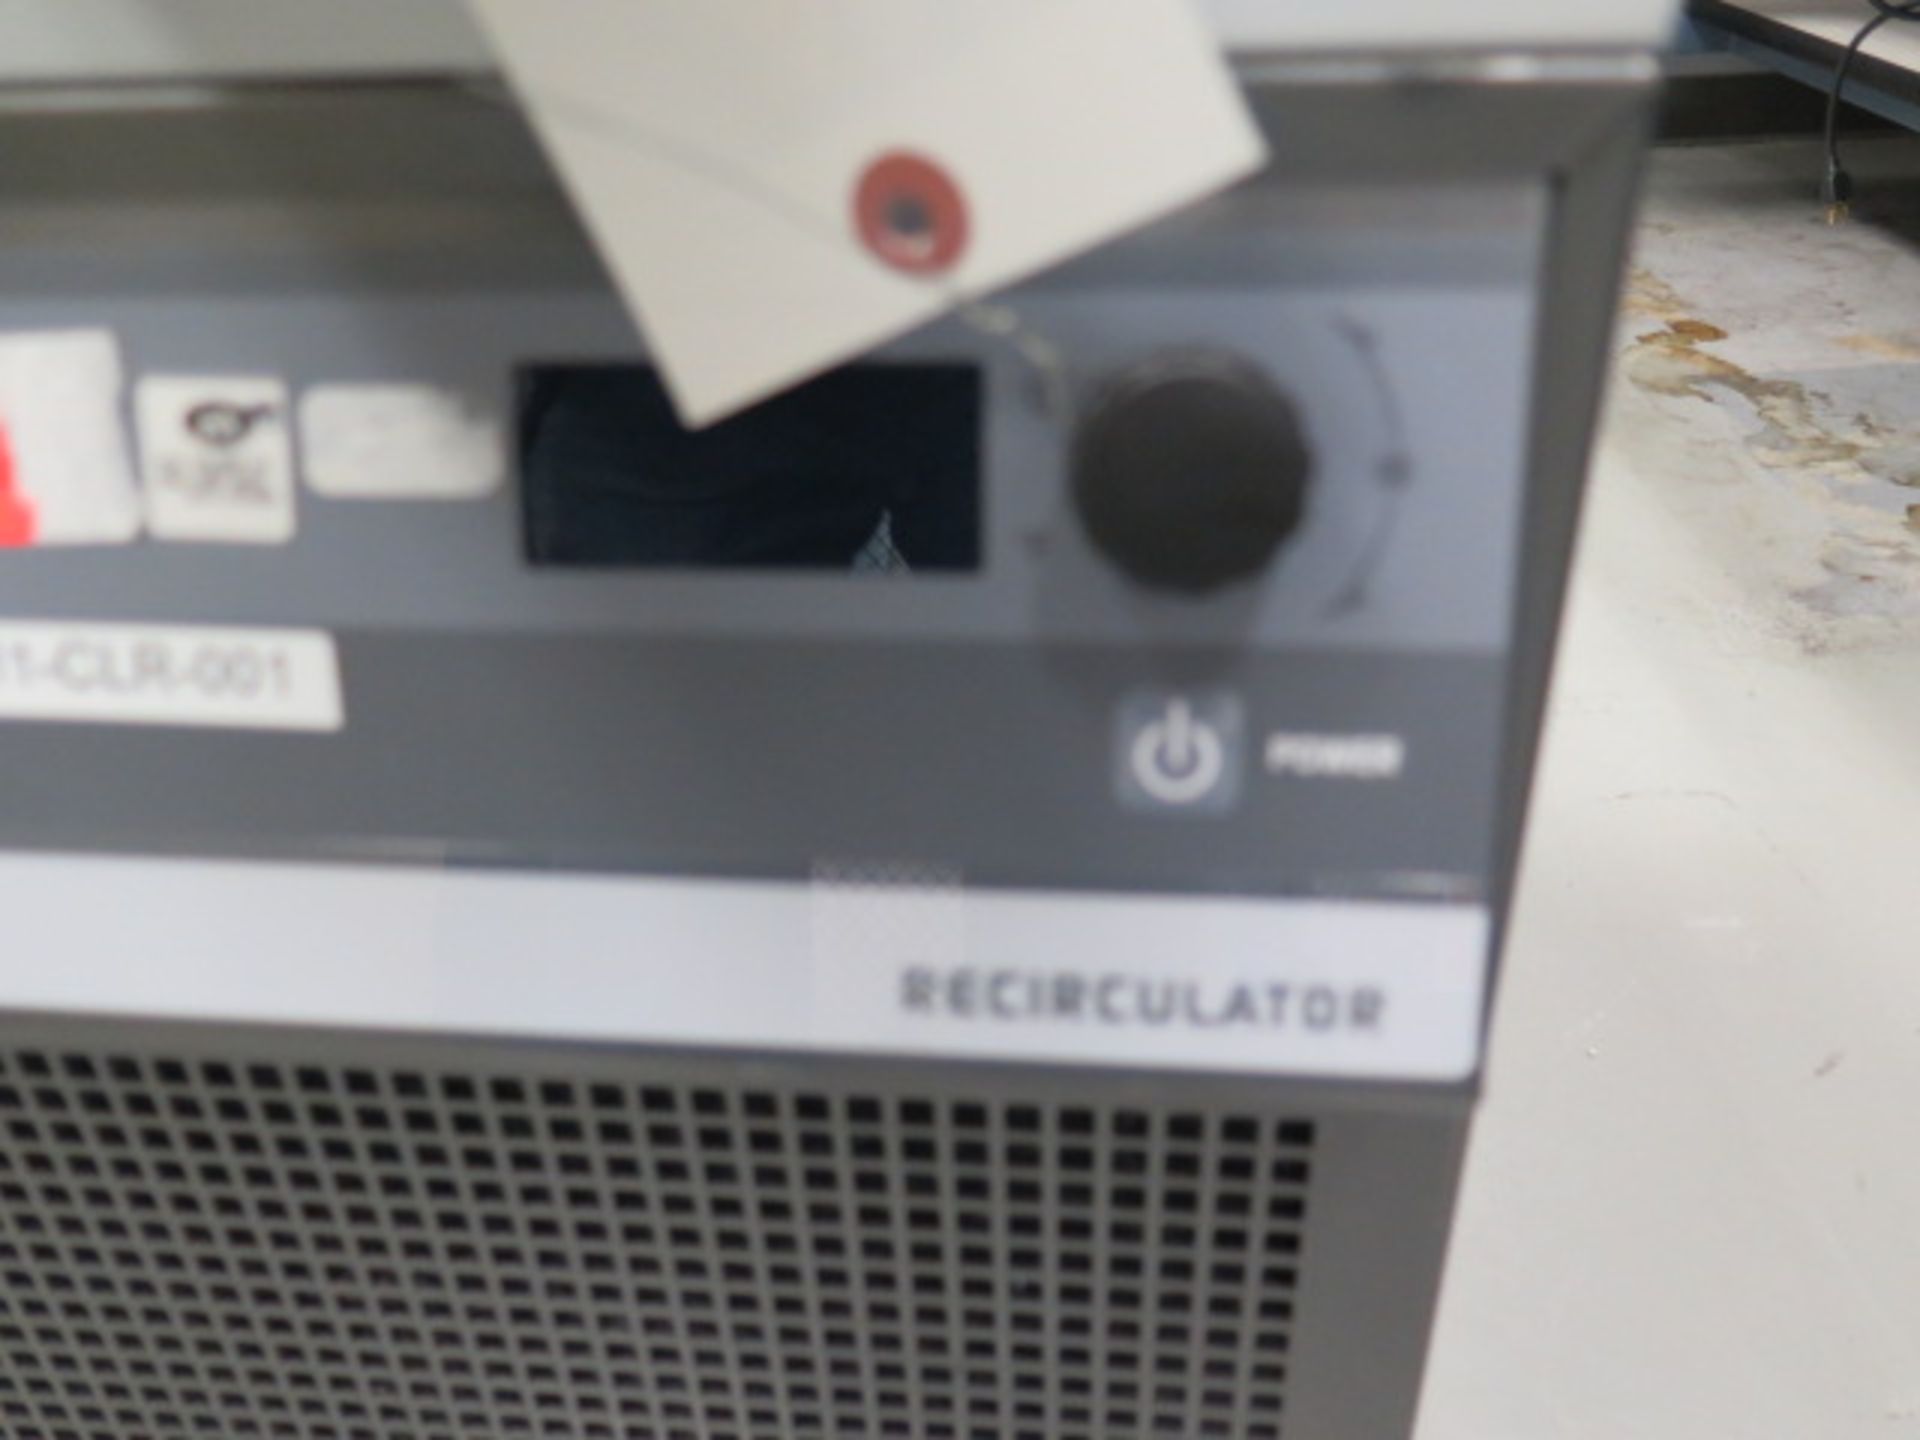 VWR mdl. 1179PD “Recirculator” Refrigerated Cooling System s/n SM1490532 (SOLD AS-IS - NO WARRANTY) - Image 11 of 13